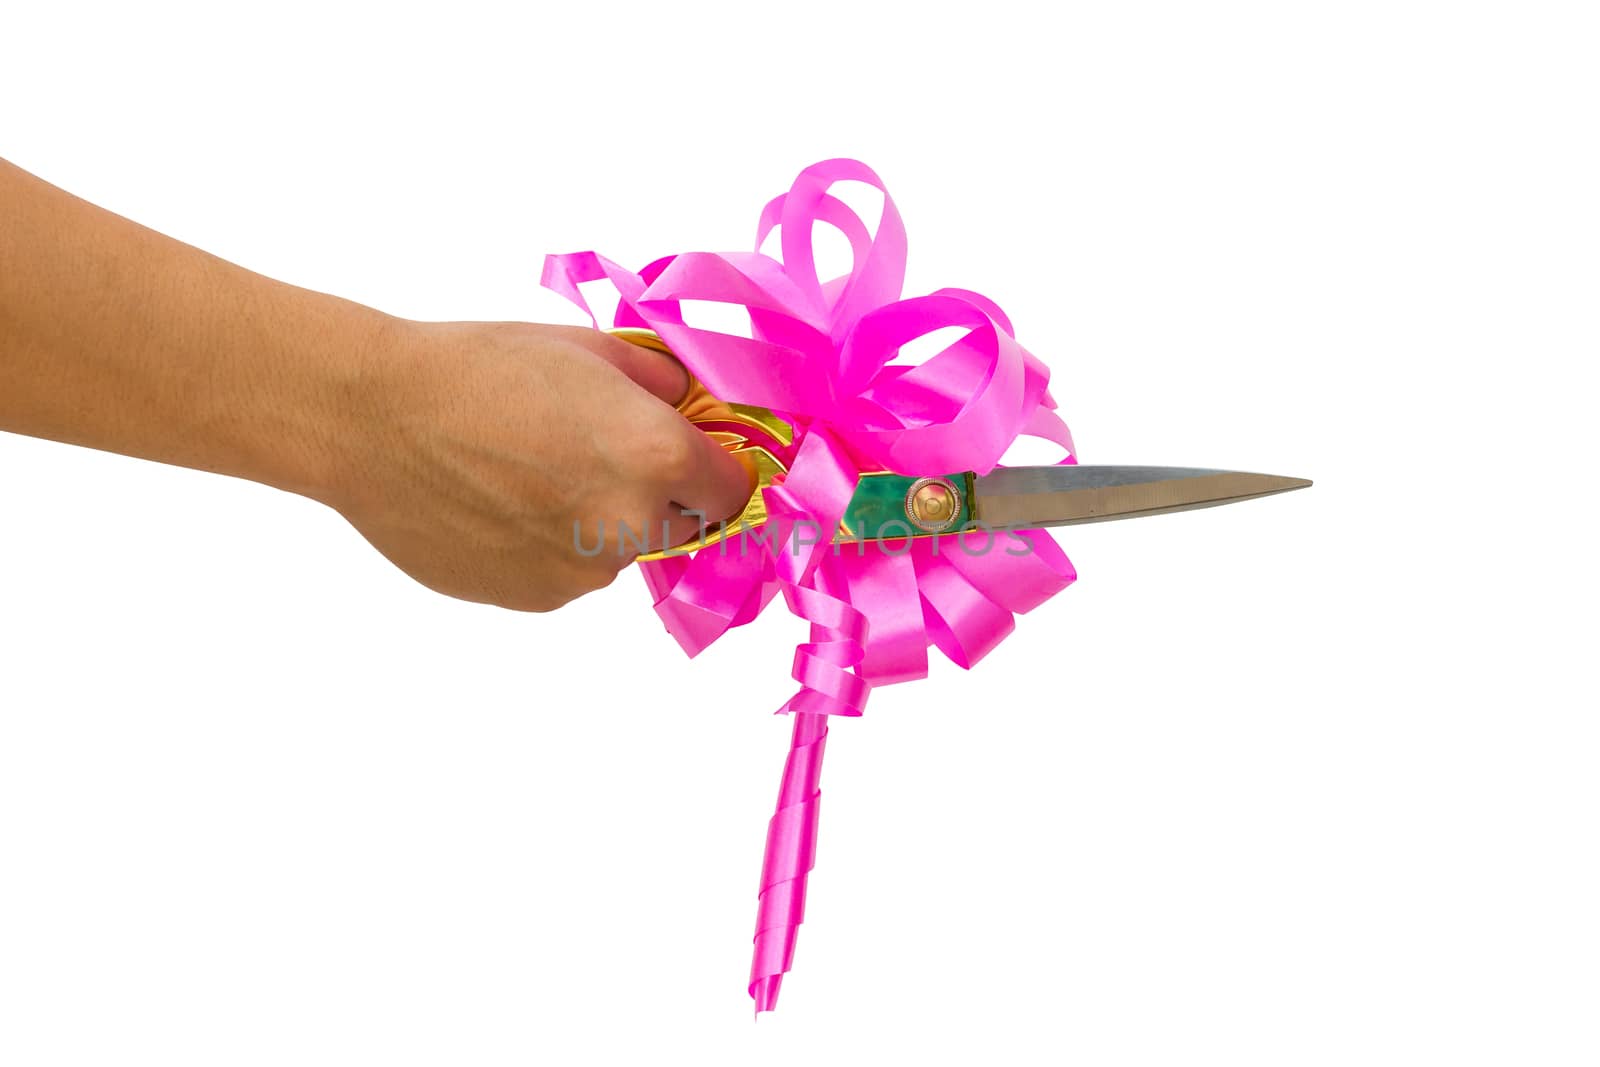 mans hand cutting something with scissors and pink bow isolated on white background.